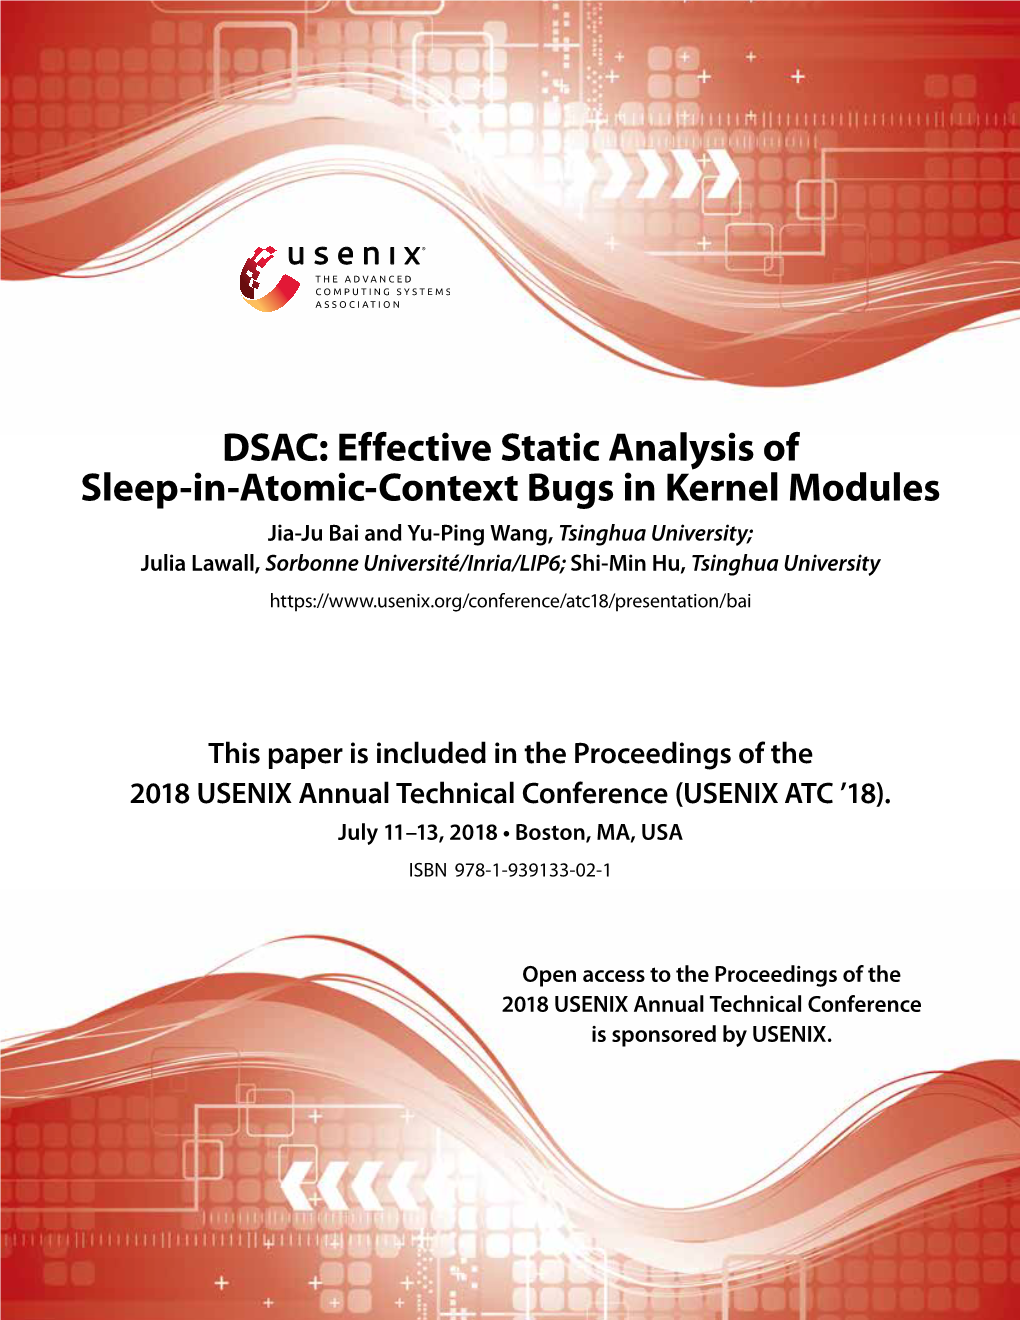 Effective Static Analysis of Sleep-In-Atomic-Context